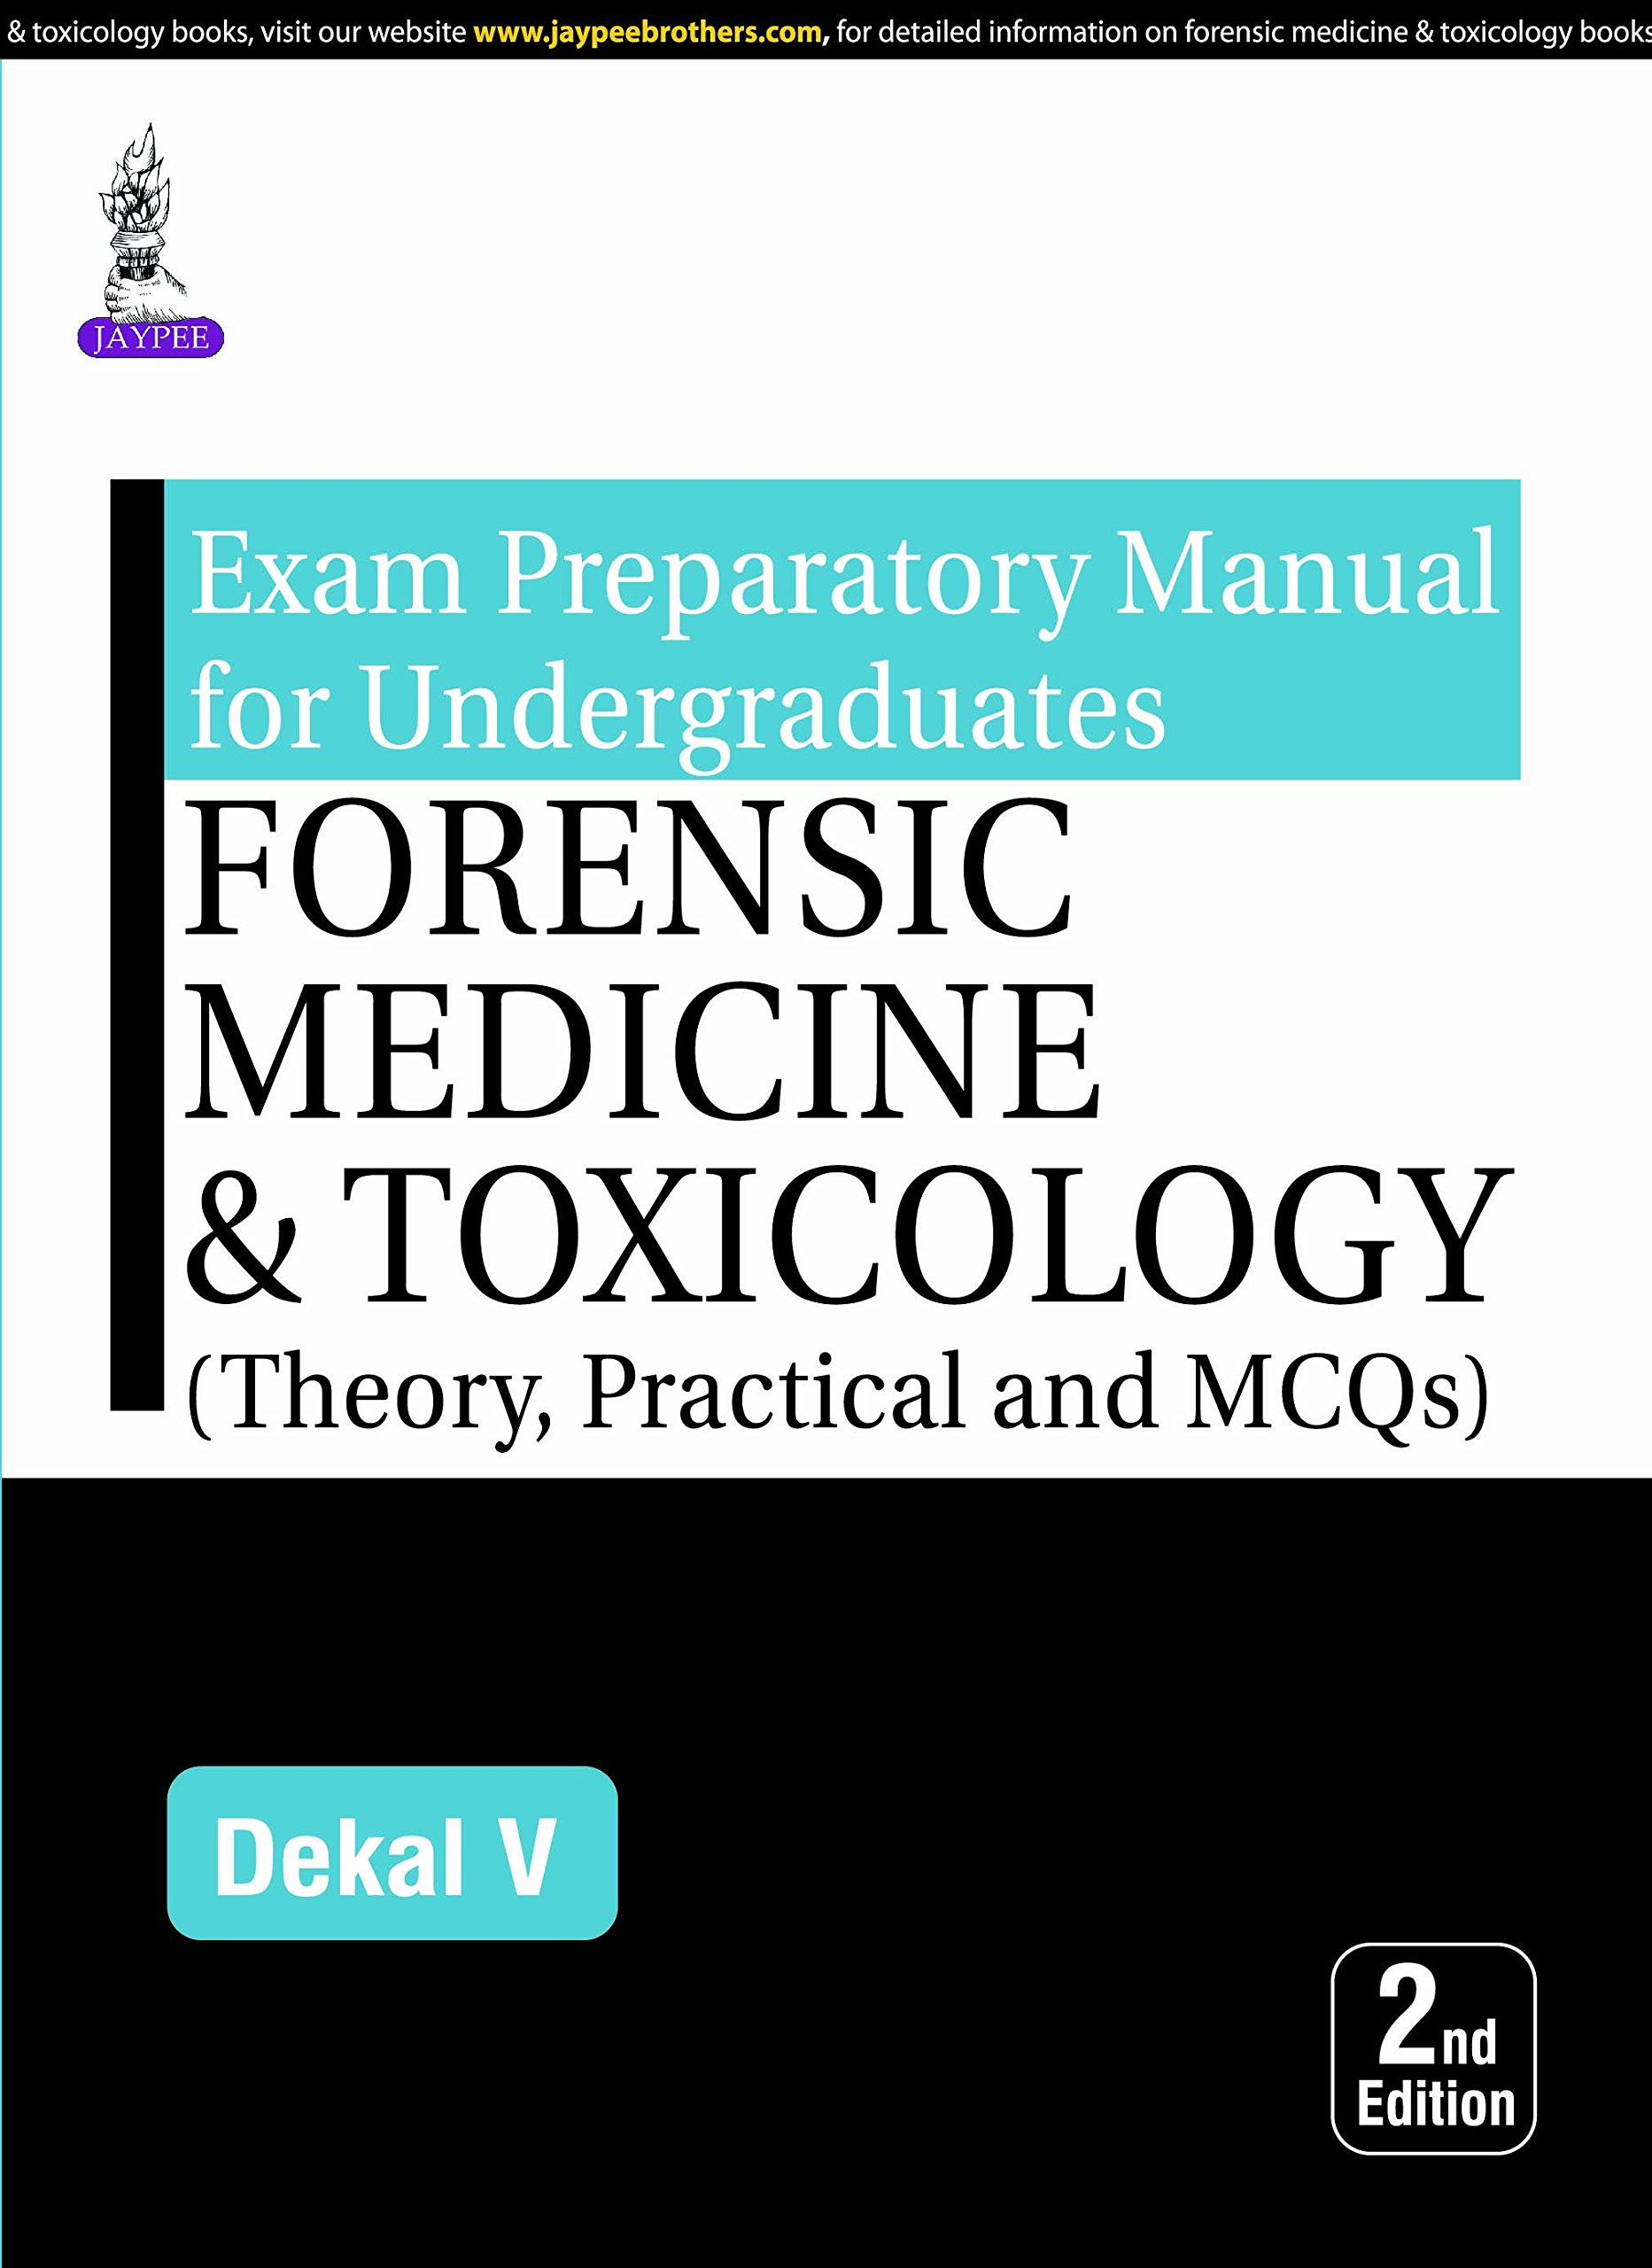 Exam Preparatory Manual For Undergraduates Forensic Medicine & Toxicology(Theory,Practical And